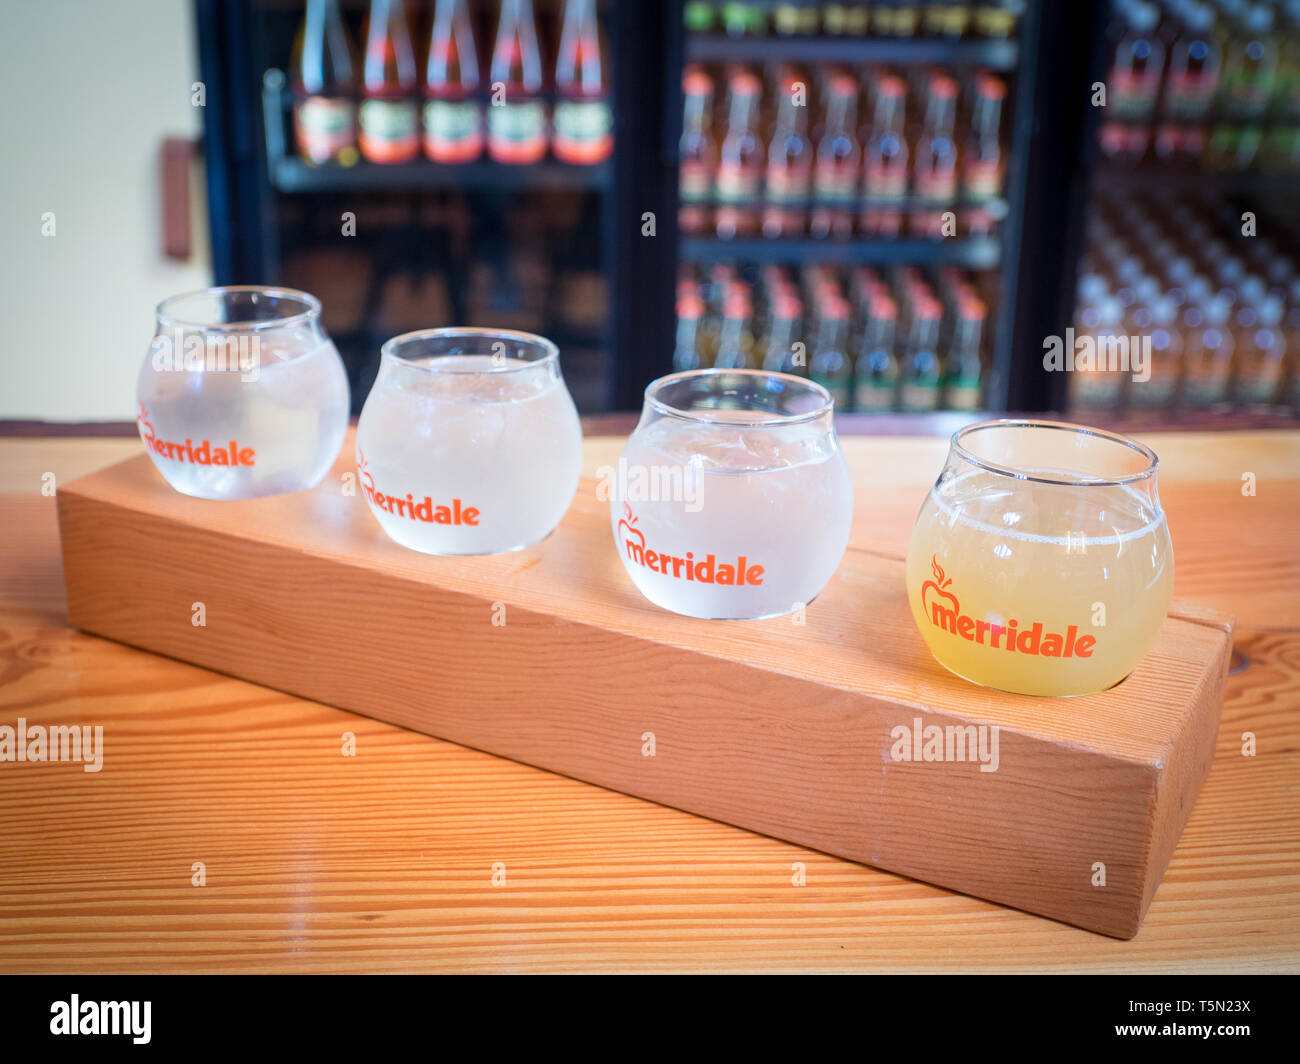 A flight of craft sodas and apple juice at the Tasting Bar, Merridale Cidery and Distillery in Cobble Hill, Cowichan Valley, British Columbia, Canada. Stock Photo